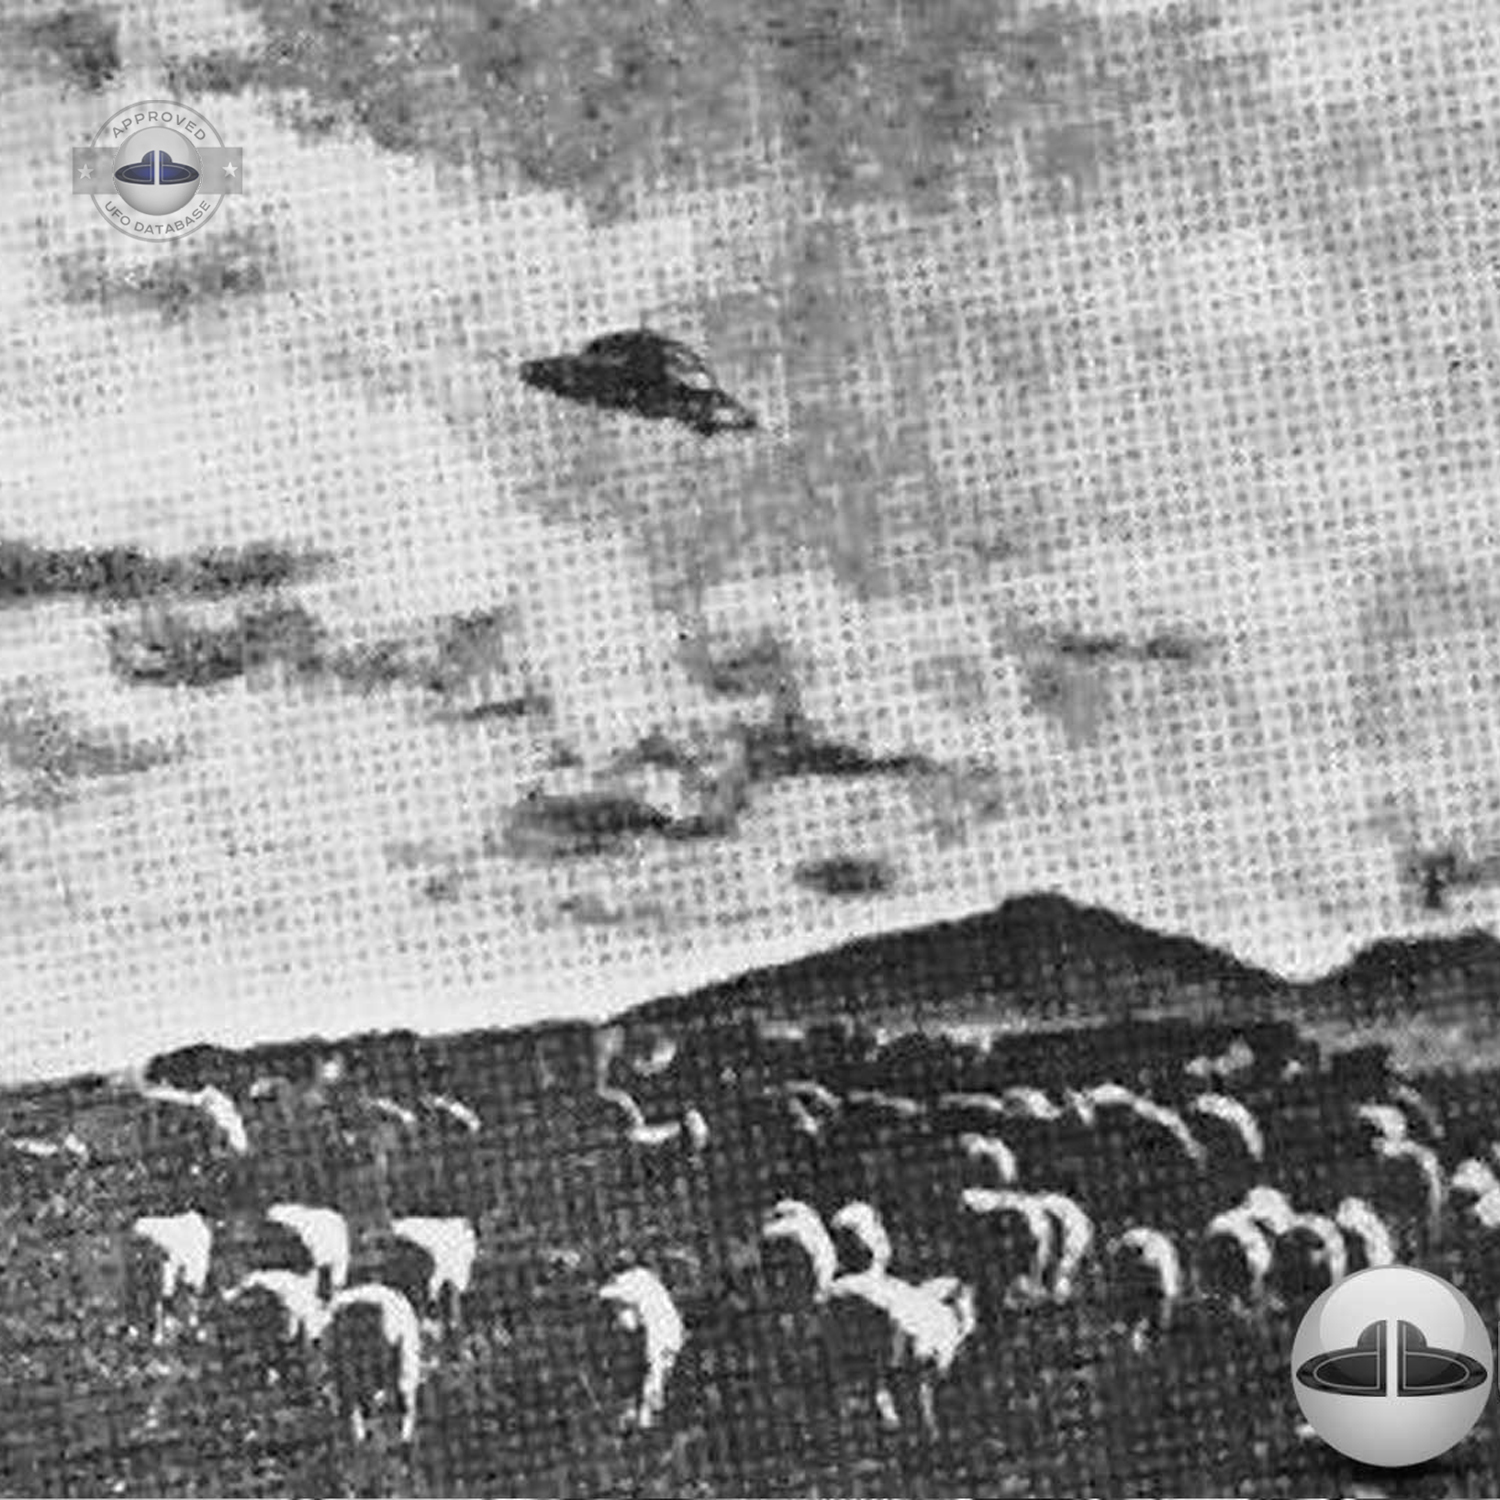 UFO over a flock of sheep Sighting in North Queensland Australia 1954 UFO Picture #100-2